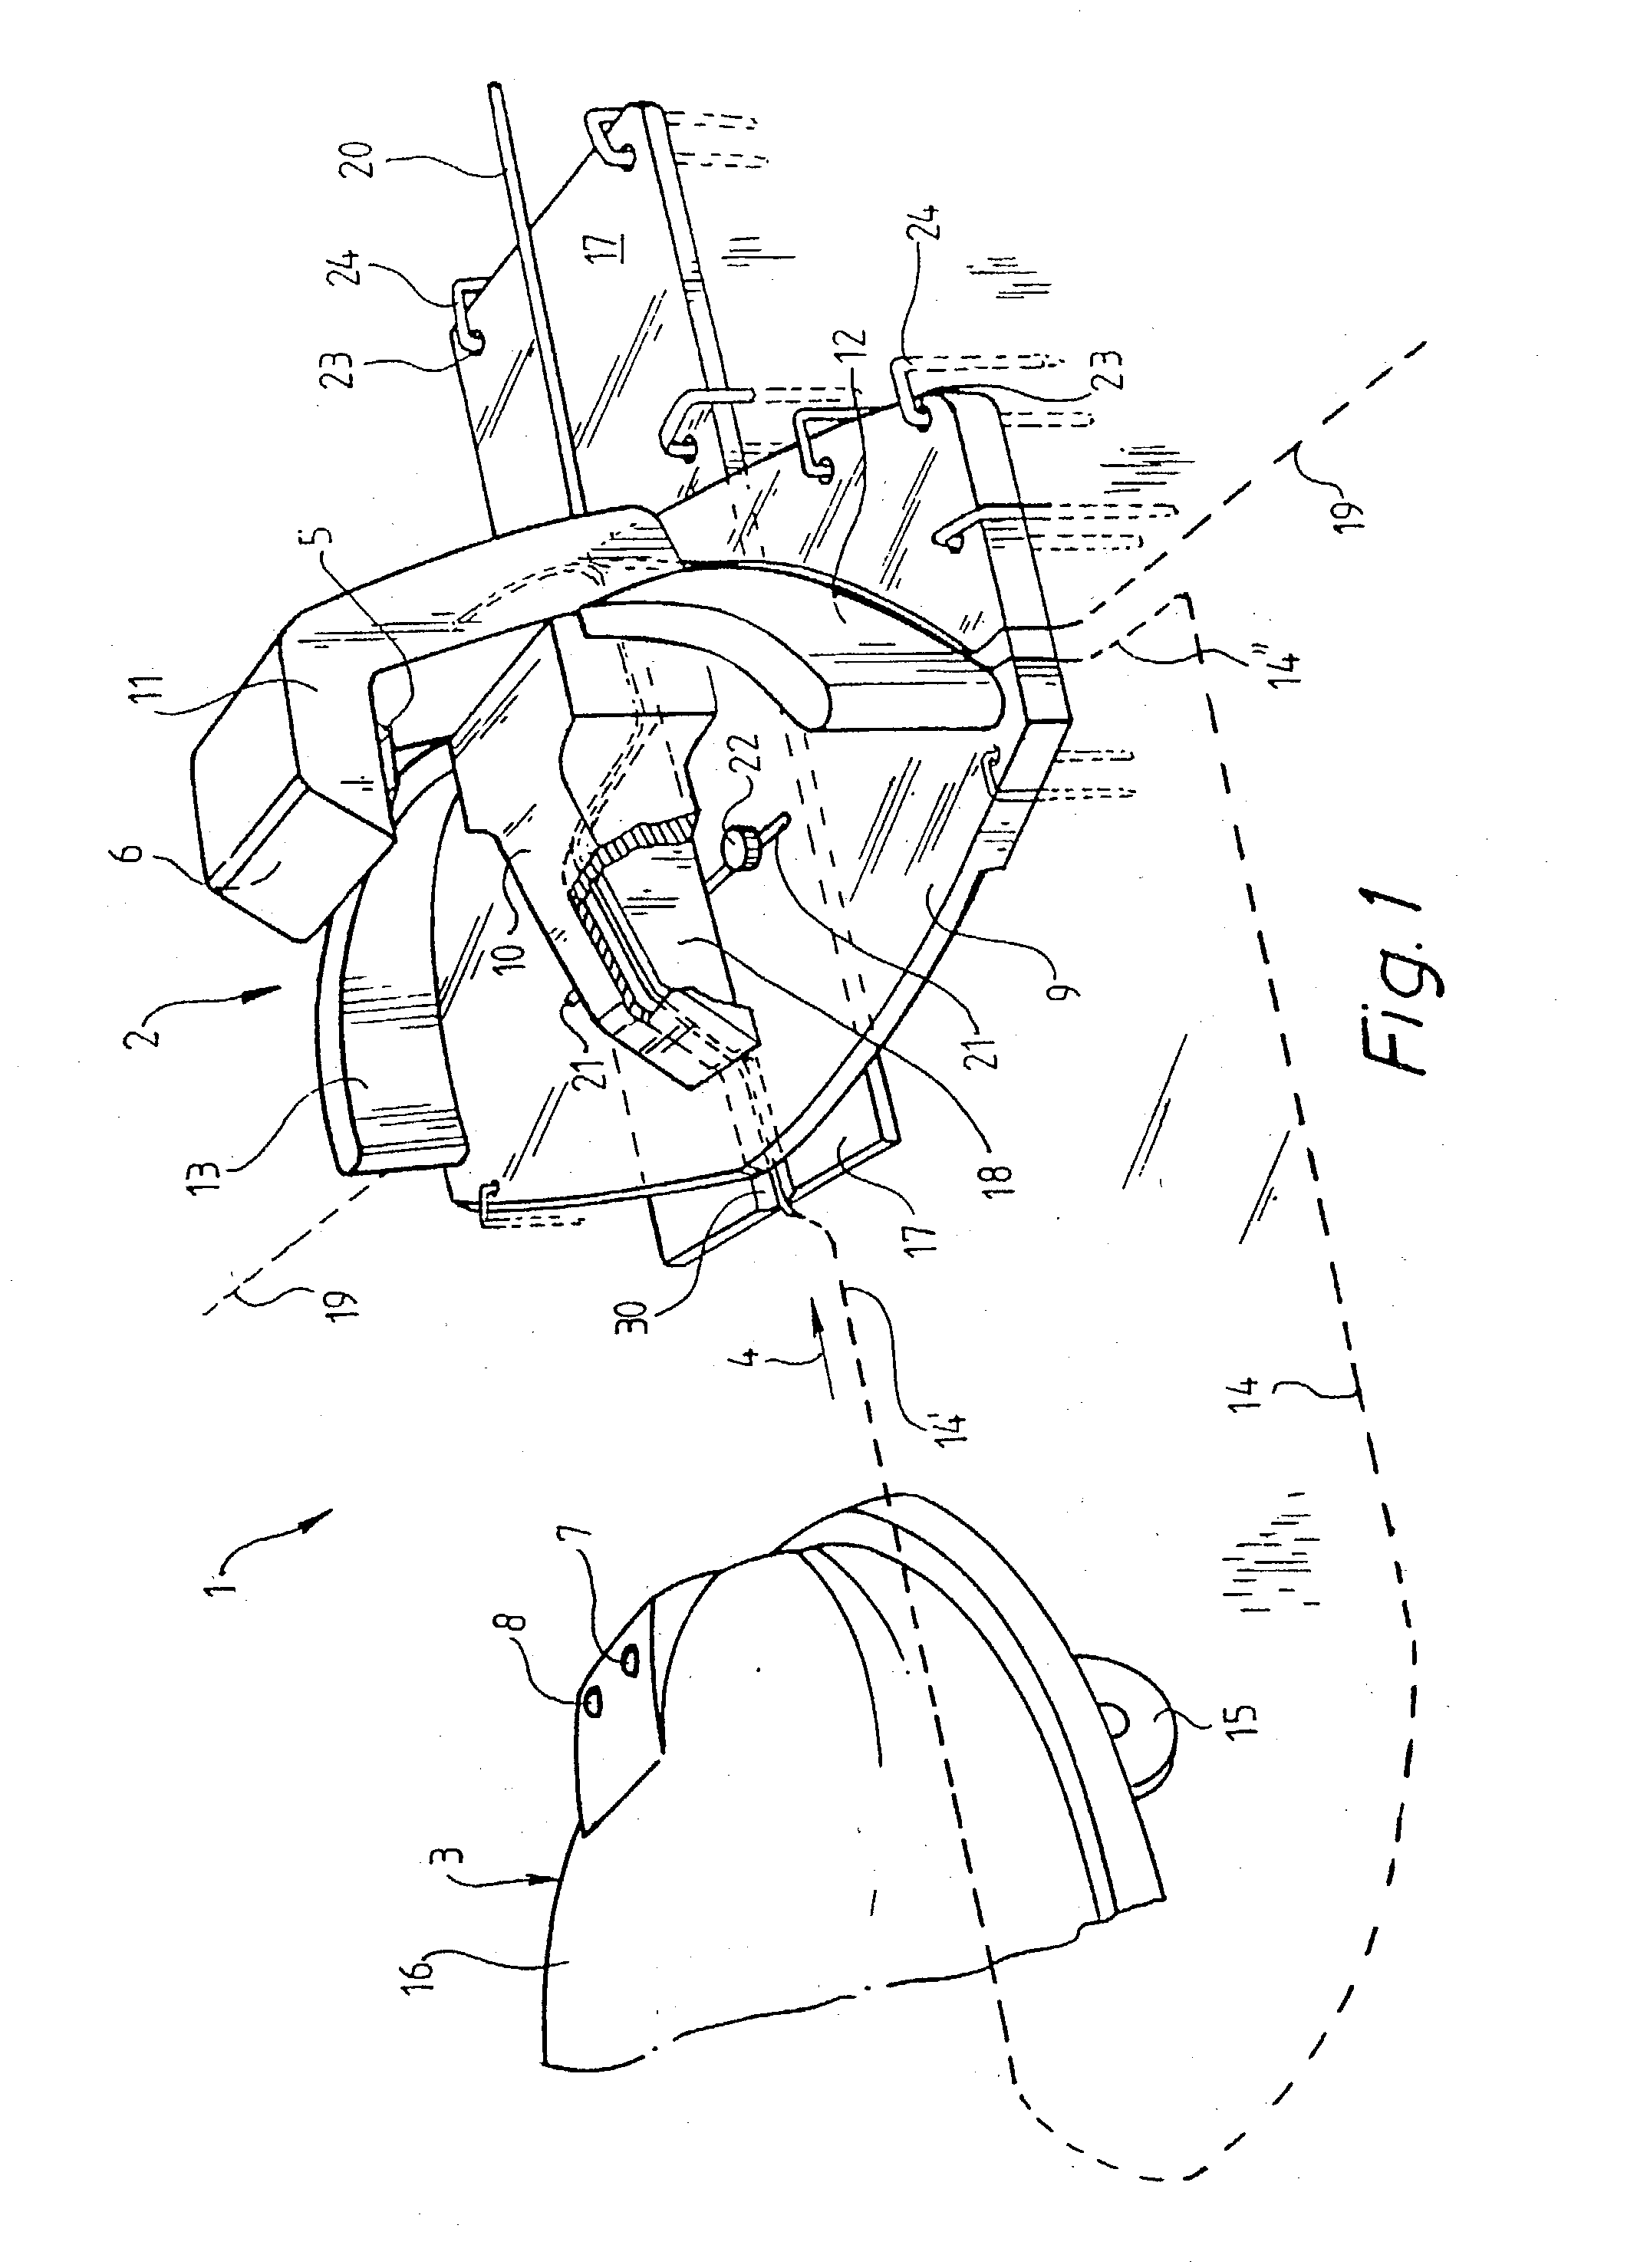 Docking system for a self-propelled working tool